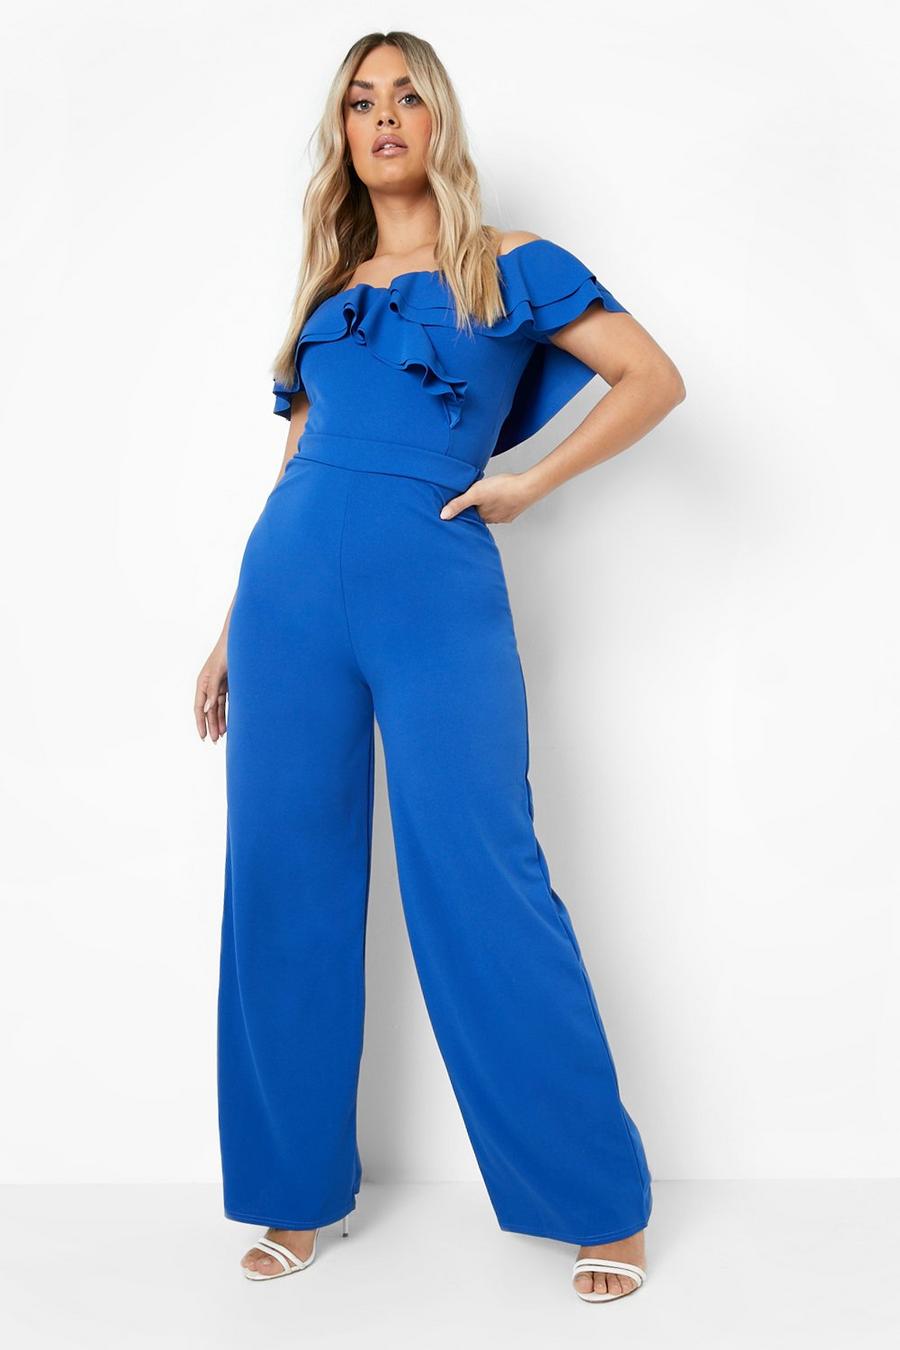 Blue Plus Ruffle Bodysuit And Pants Co-Ord